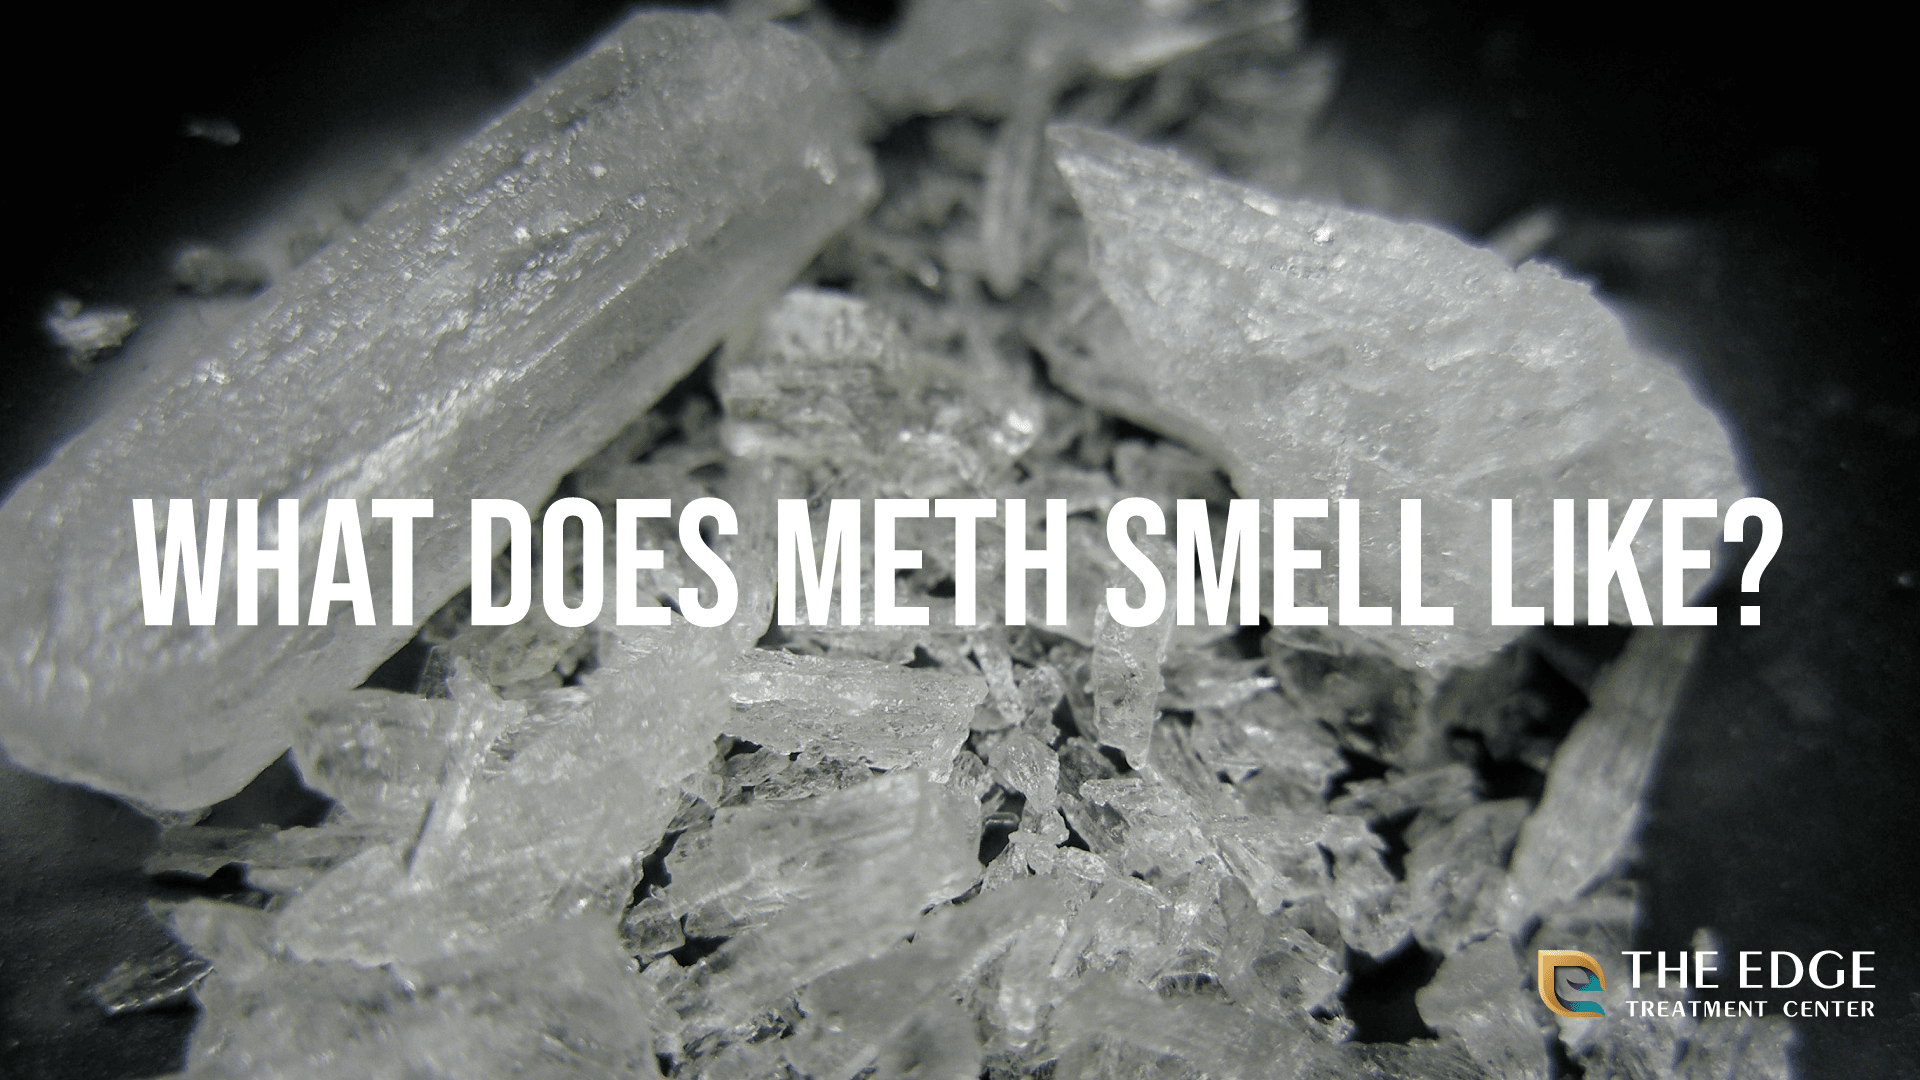 What Does Meth Smell Like?